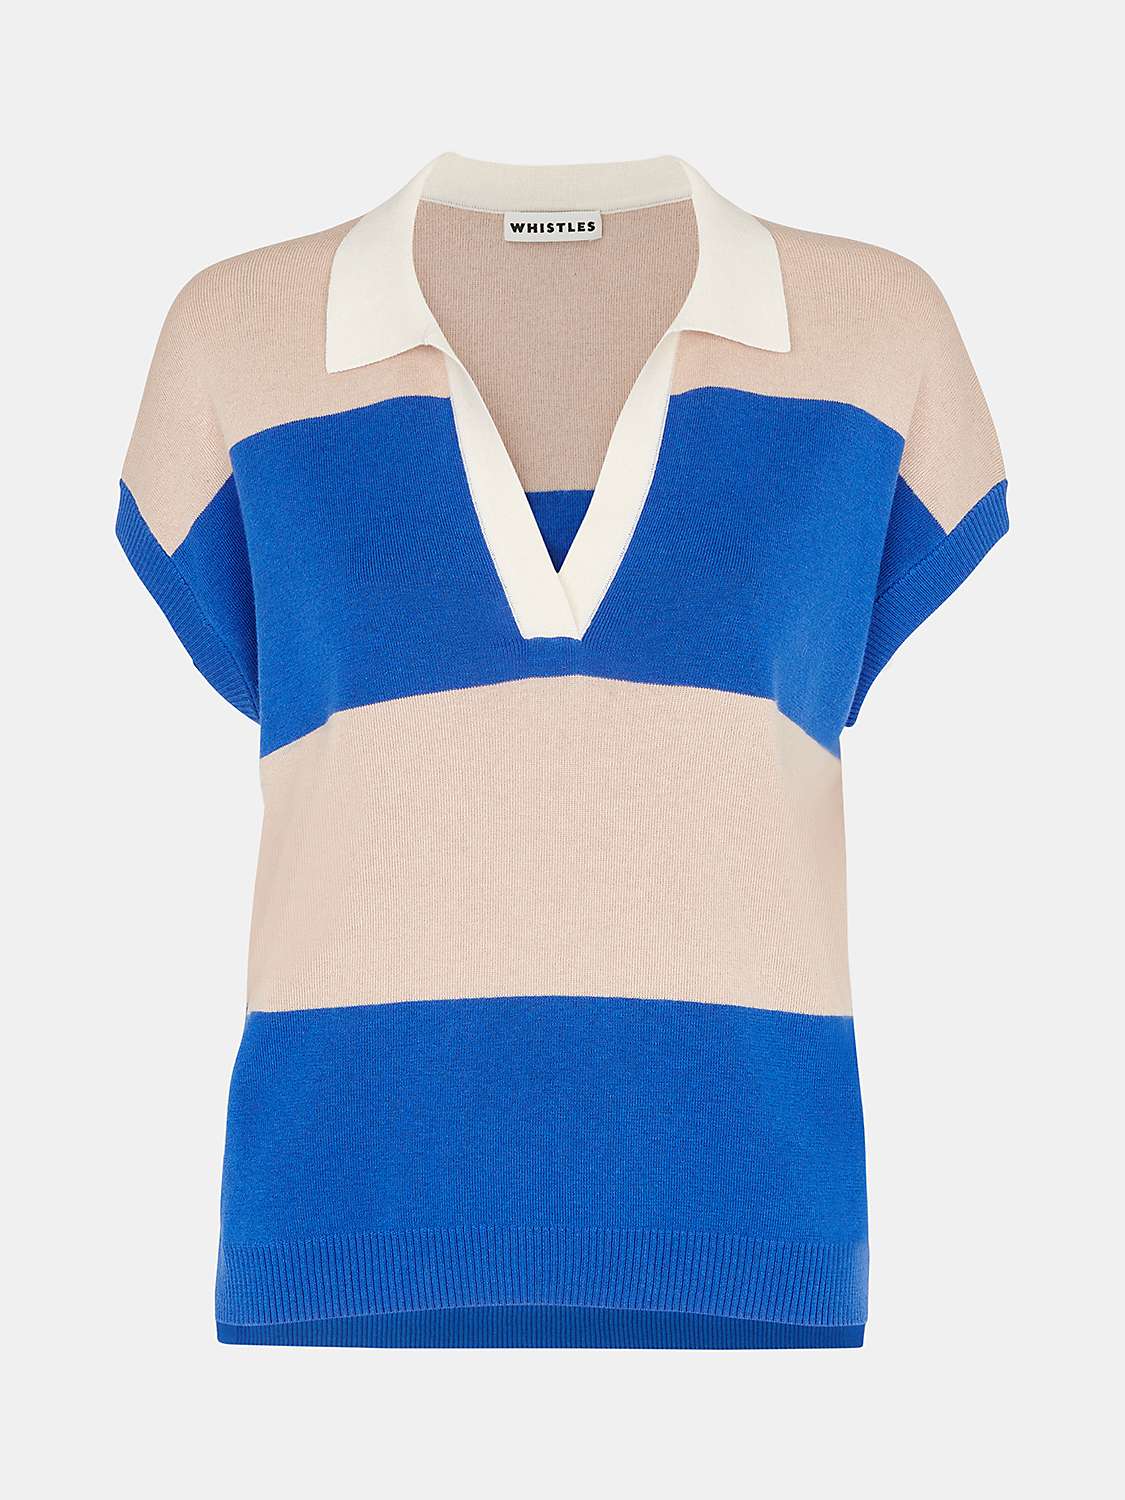 Buy Whistles Lyla Striped Knitted Polo Top, Blue/Multi Online at johnlewis.com